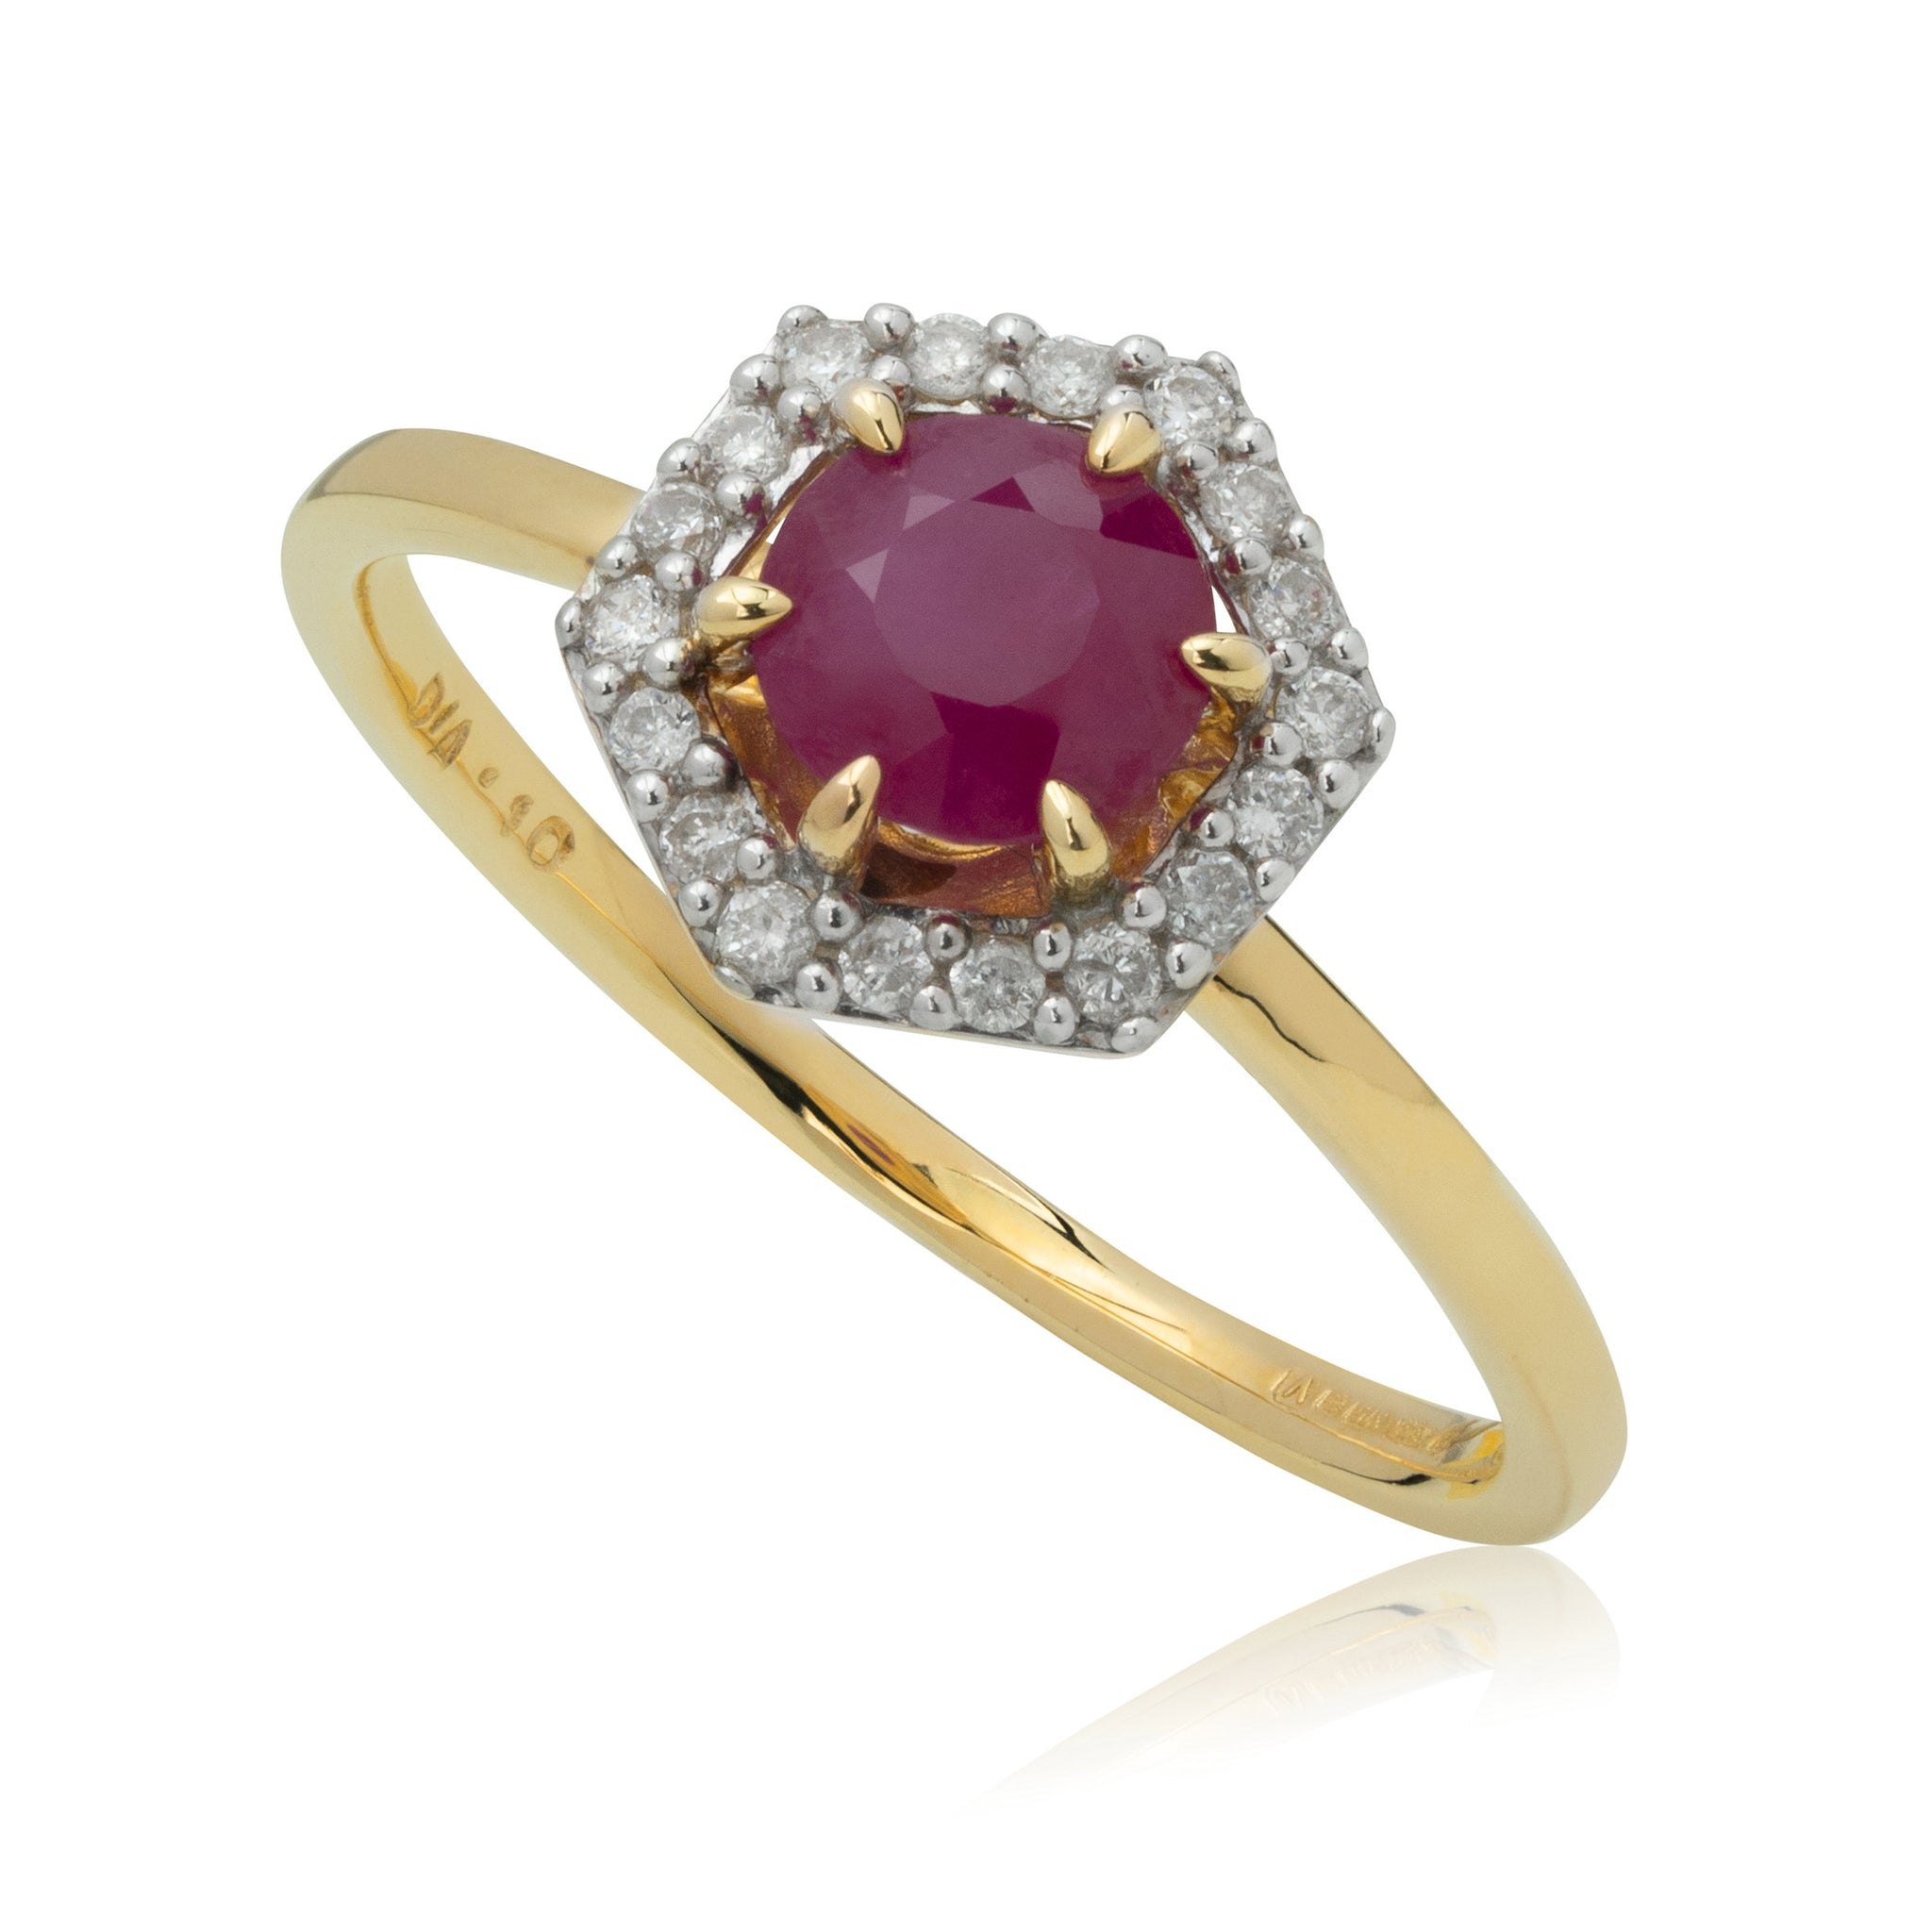 Ruby & diamond halo engagement ring in 18ct yellow gold